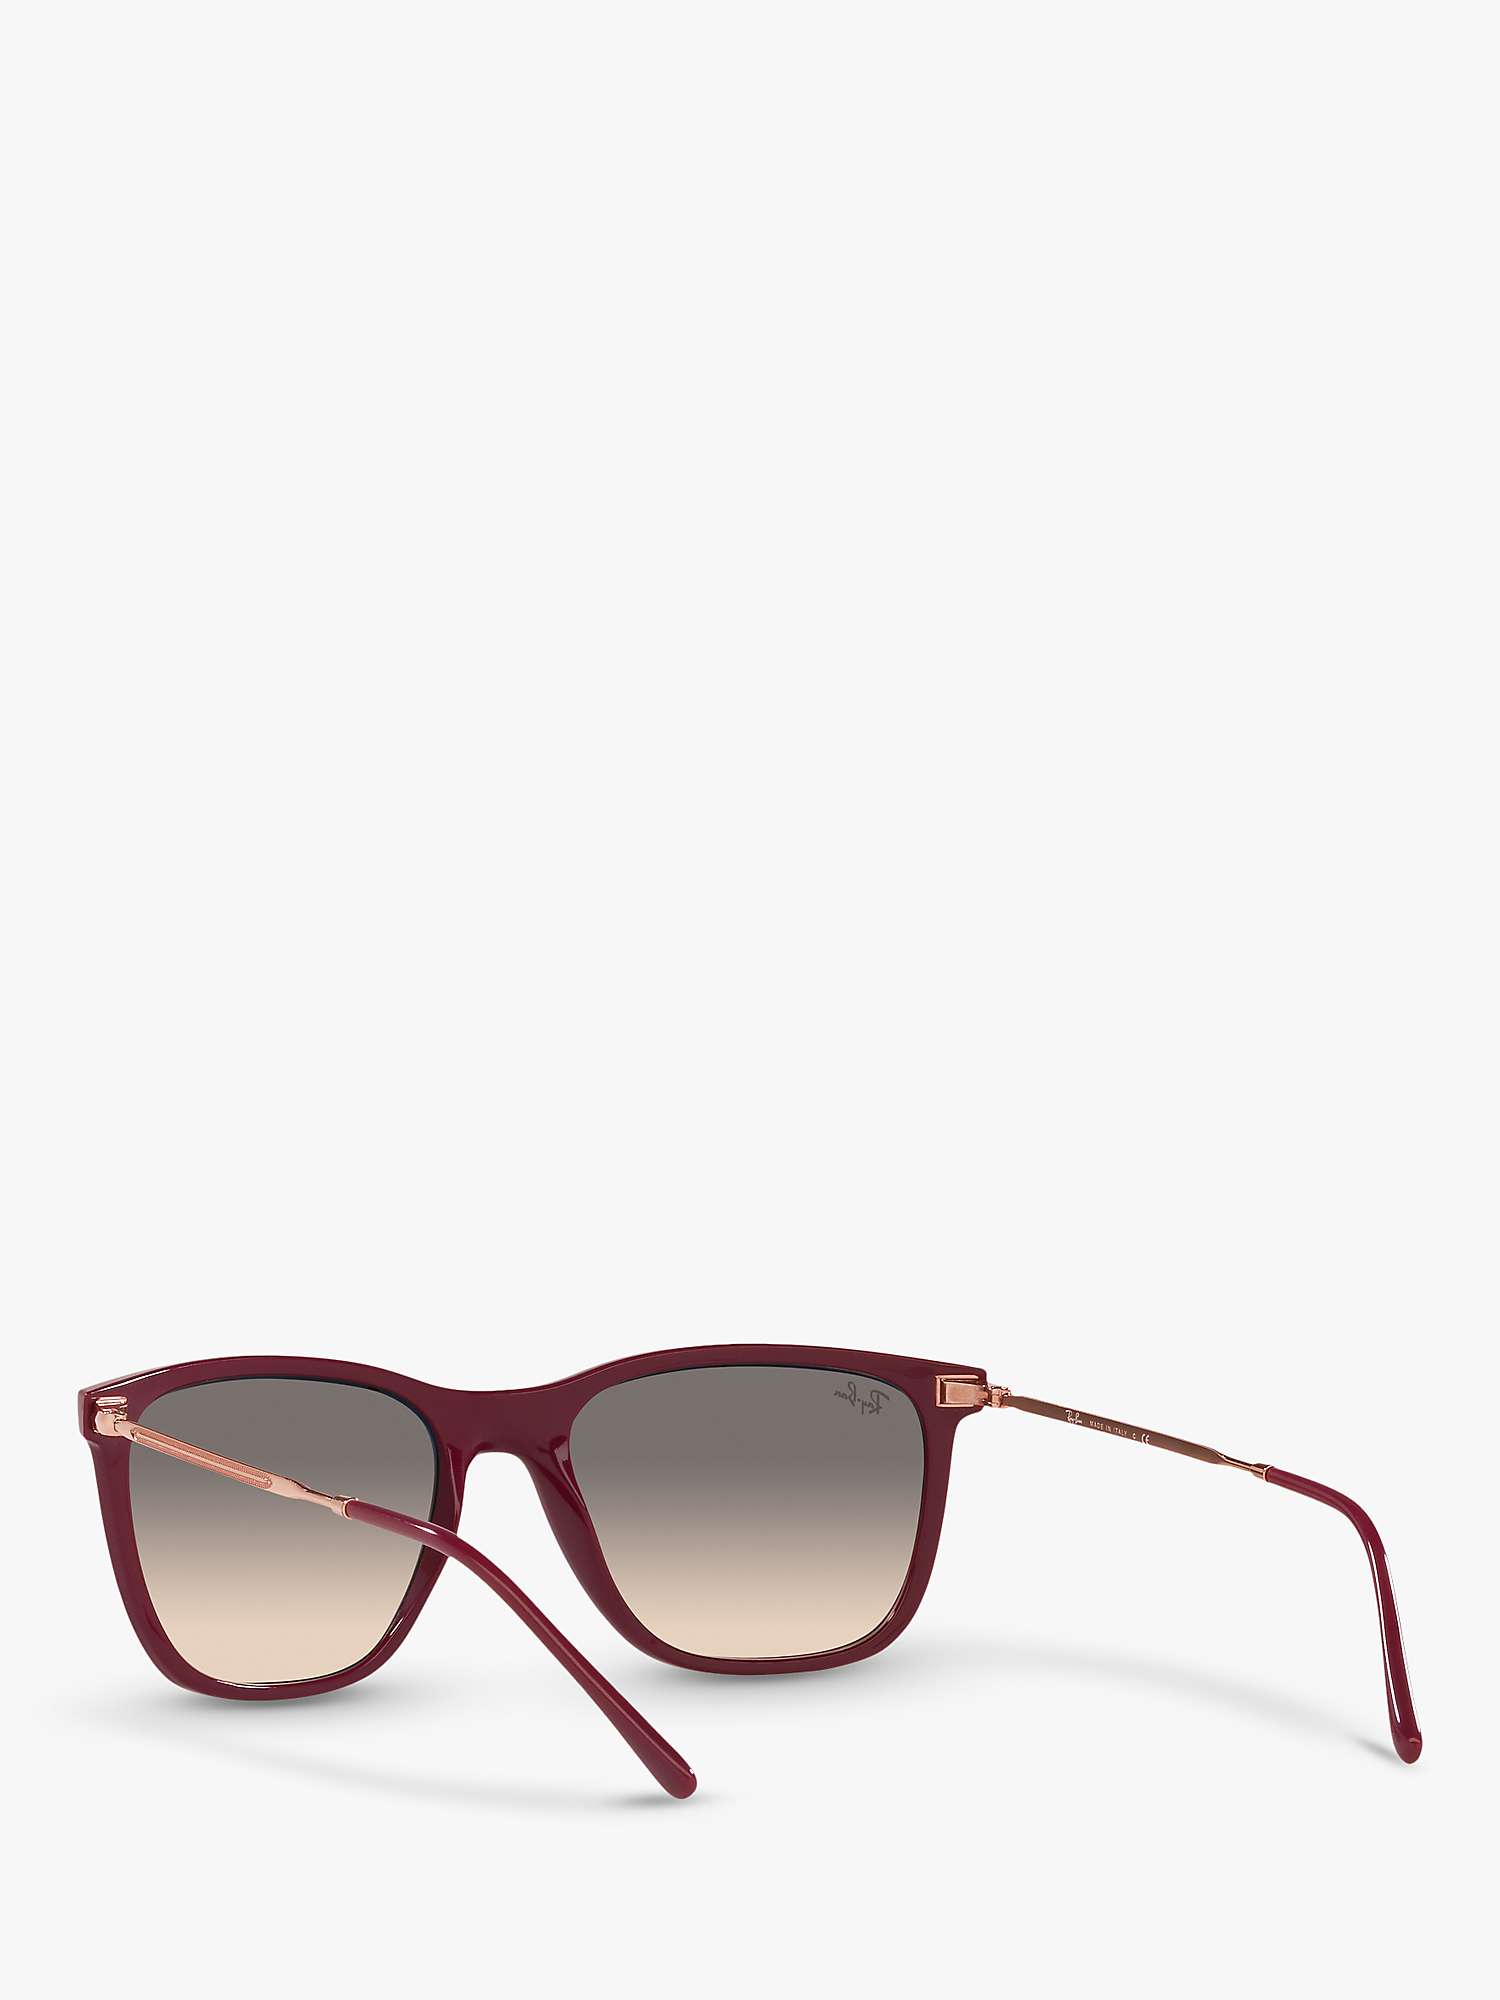 Buy Ray-Ban RB4344 Unisex Pillow Square Frame Sunglasses, Cherry Red/Gold/Light Grey Gradient Online at johnlewis.com